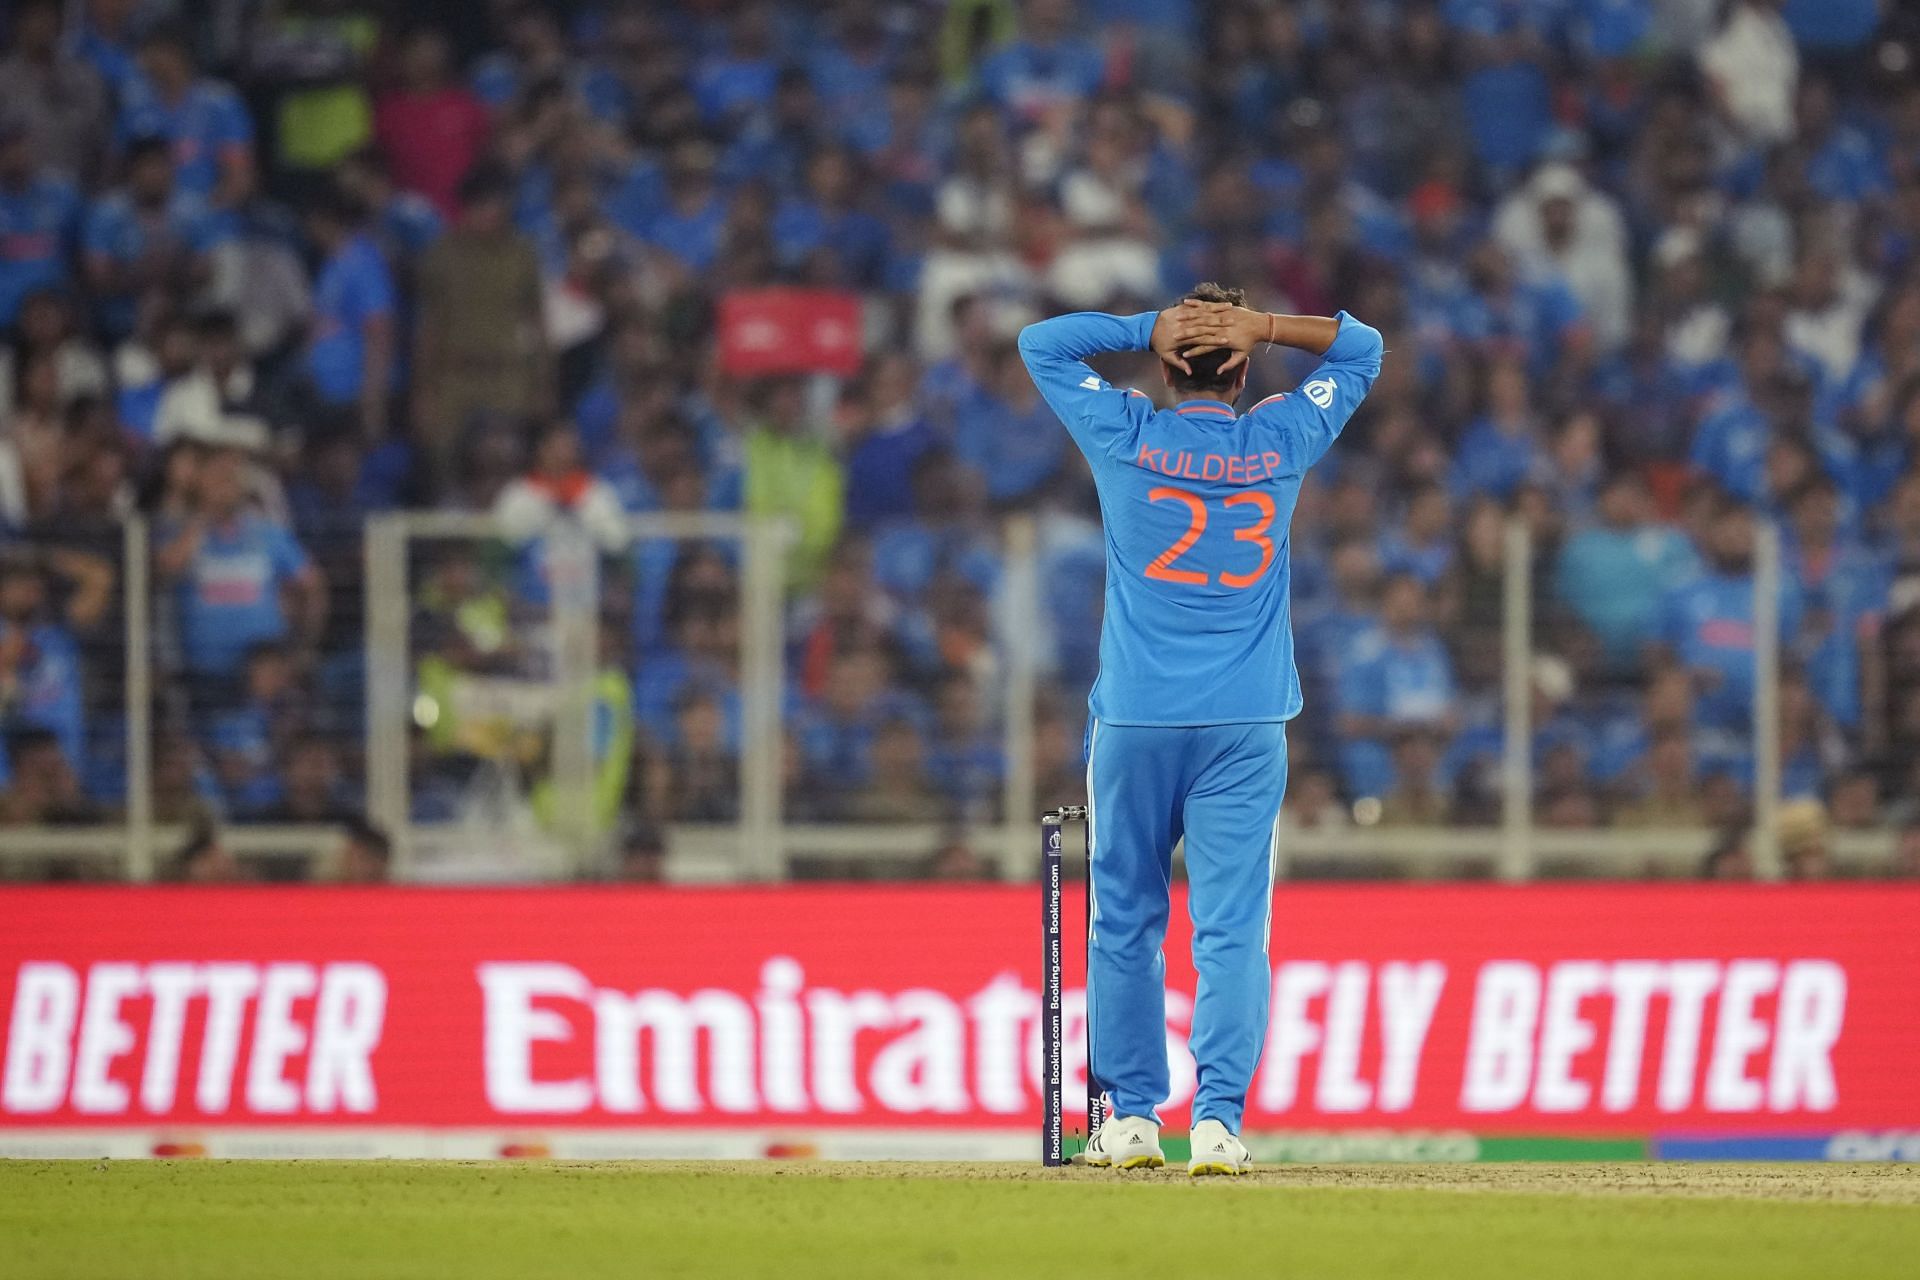 Kuldeep Yadav has picked up one wicket across the two matches